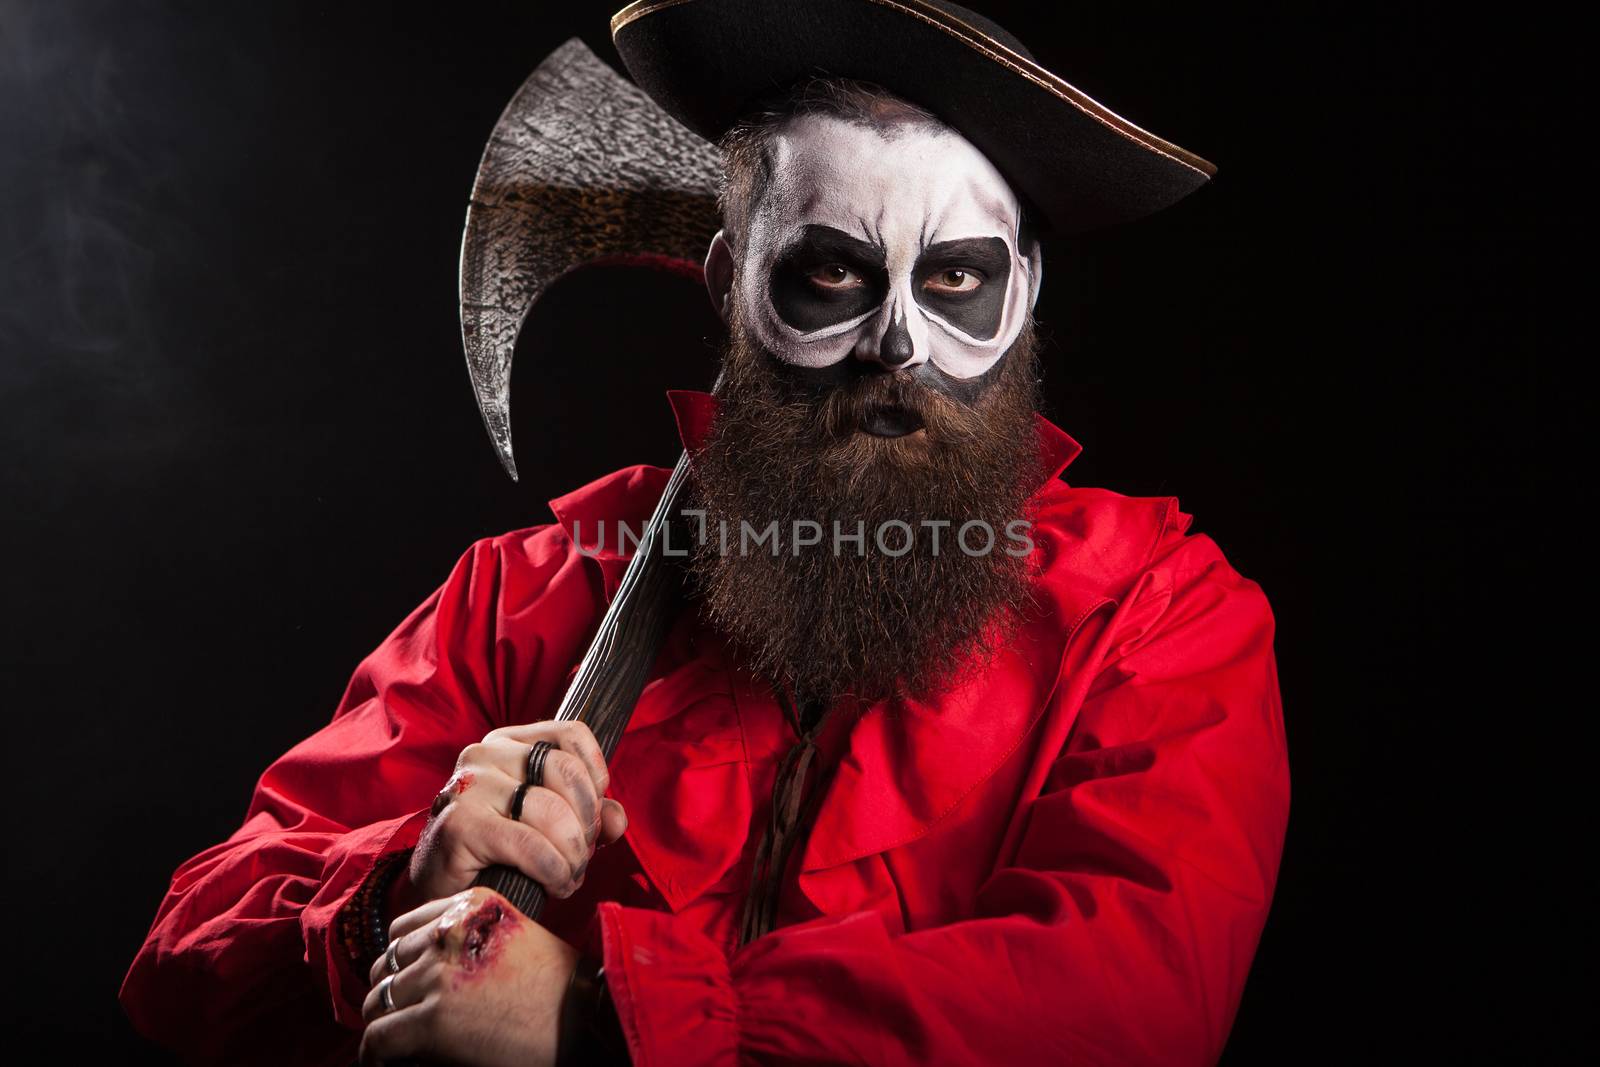 Medieval captain holding an axe over black background. Halloween outfit.